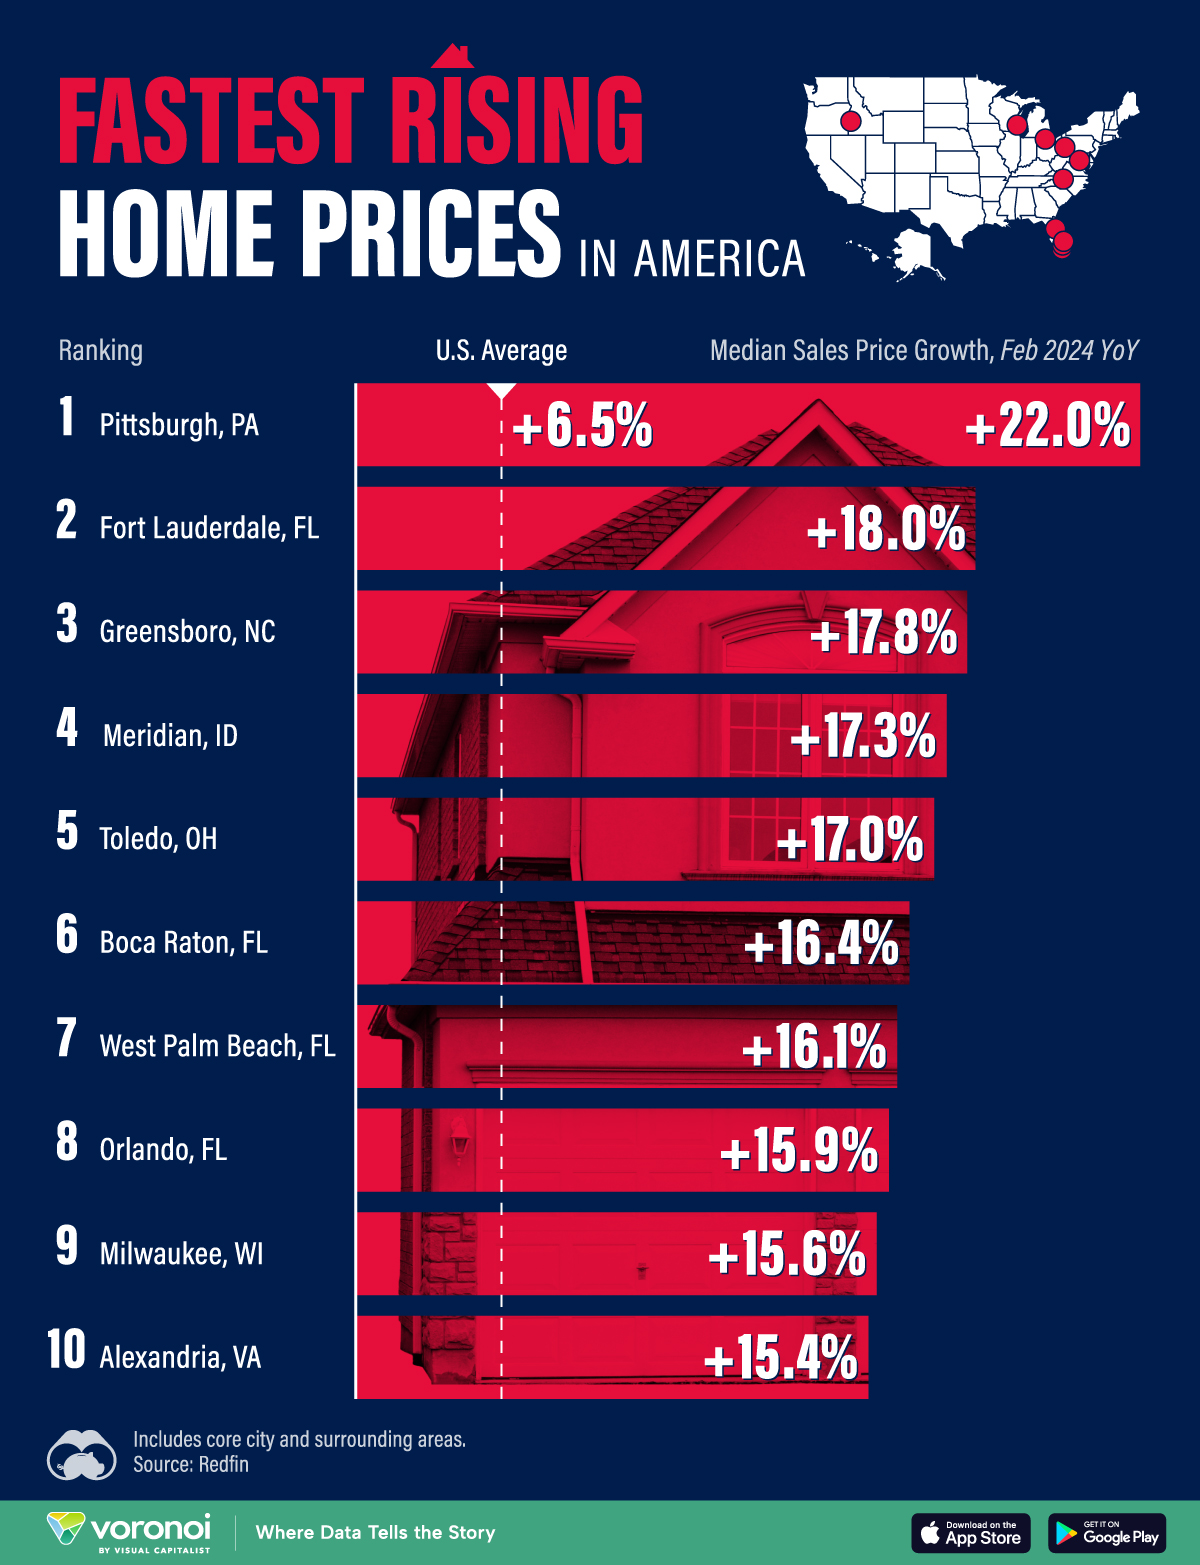 This bar chart shows the U.S. housing markets with the fastest rising home prices in 2024.